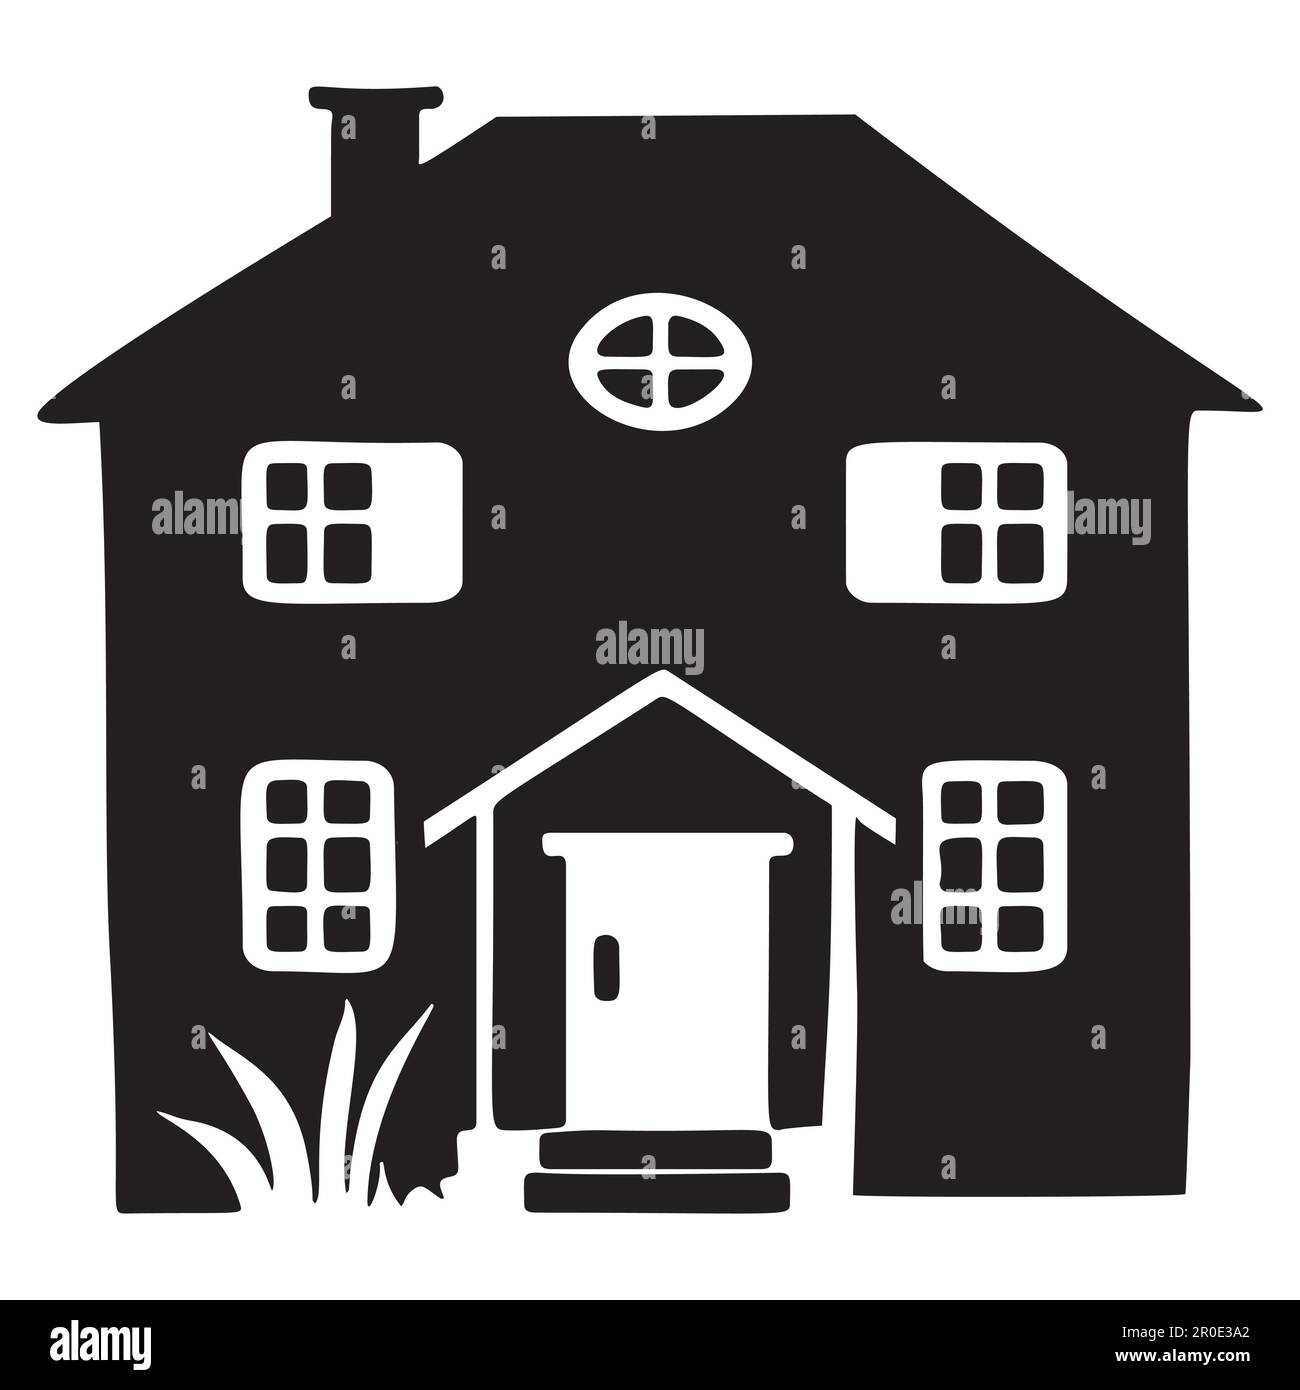 Cute rustic cottage motif in homestead vintage style. Vector illustration of whimsical rural country house.  Stock Vector